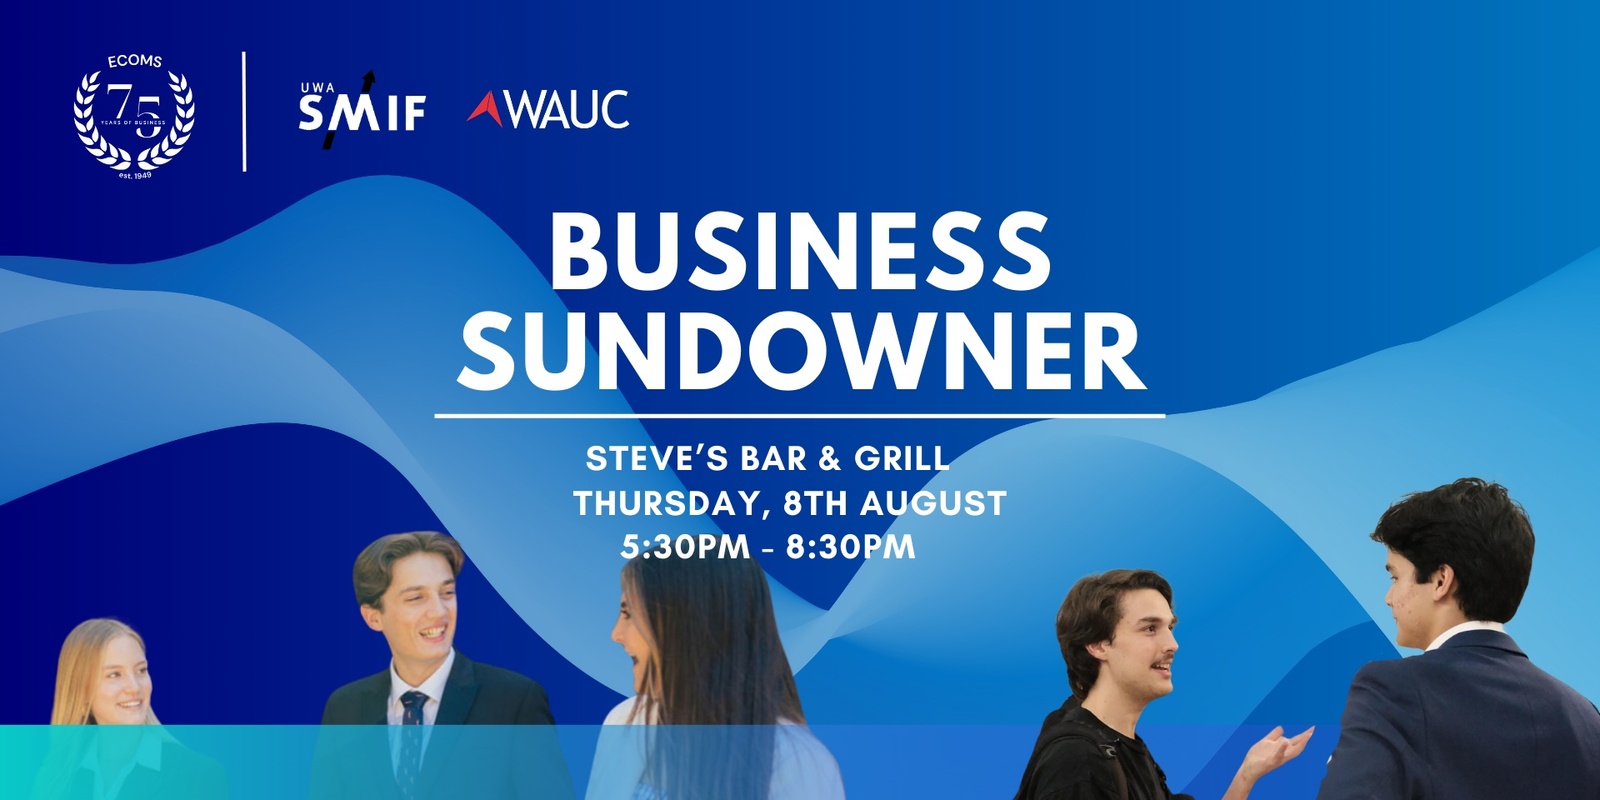 Banner image for ECOMS X SMIF X WAUC Business Sundowner